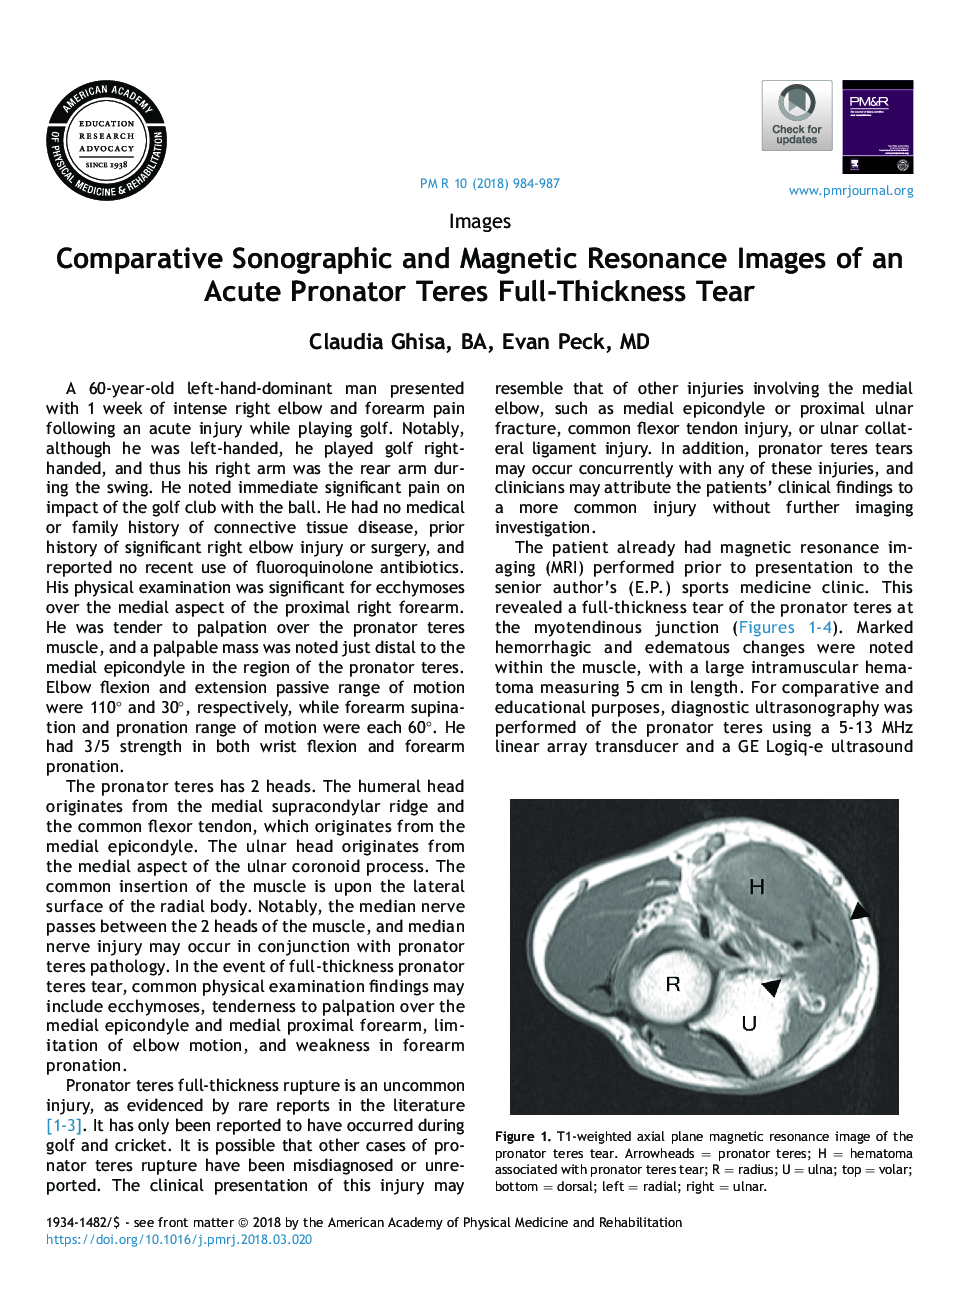 Comparative Sonographic and Magnetic Resonance Images of an Acute Pronator Teres Full-Thickness Tear